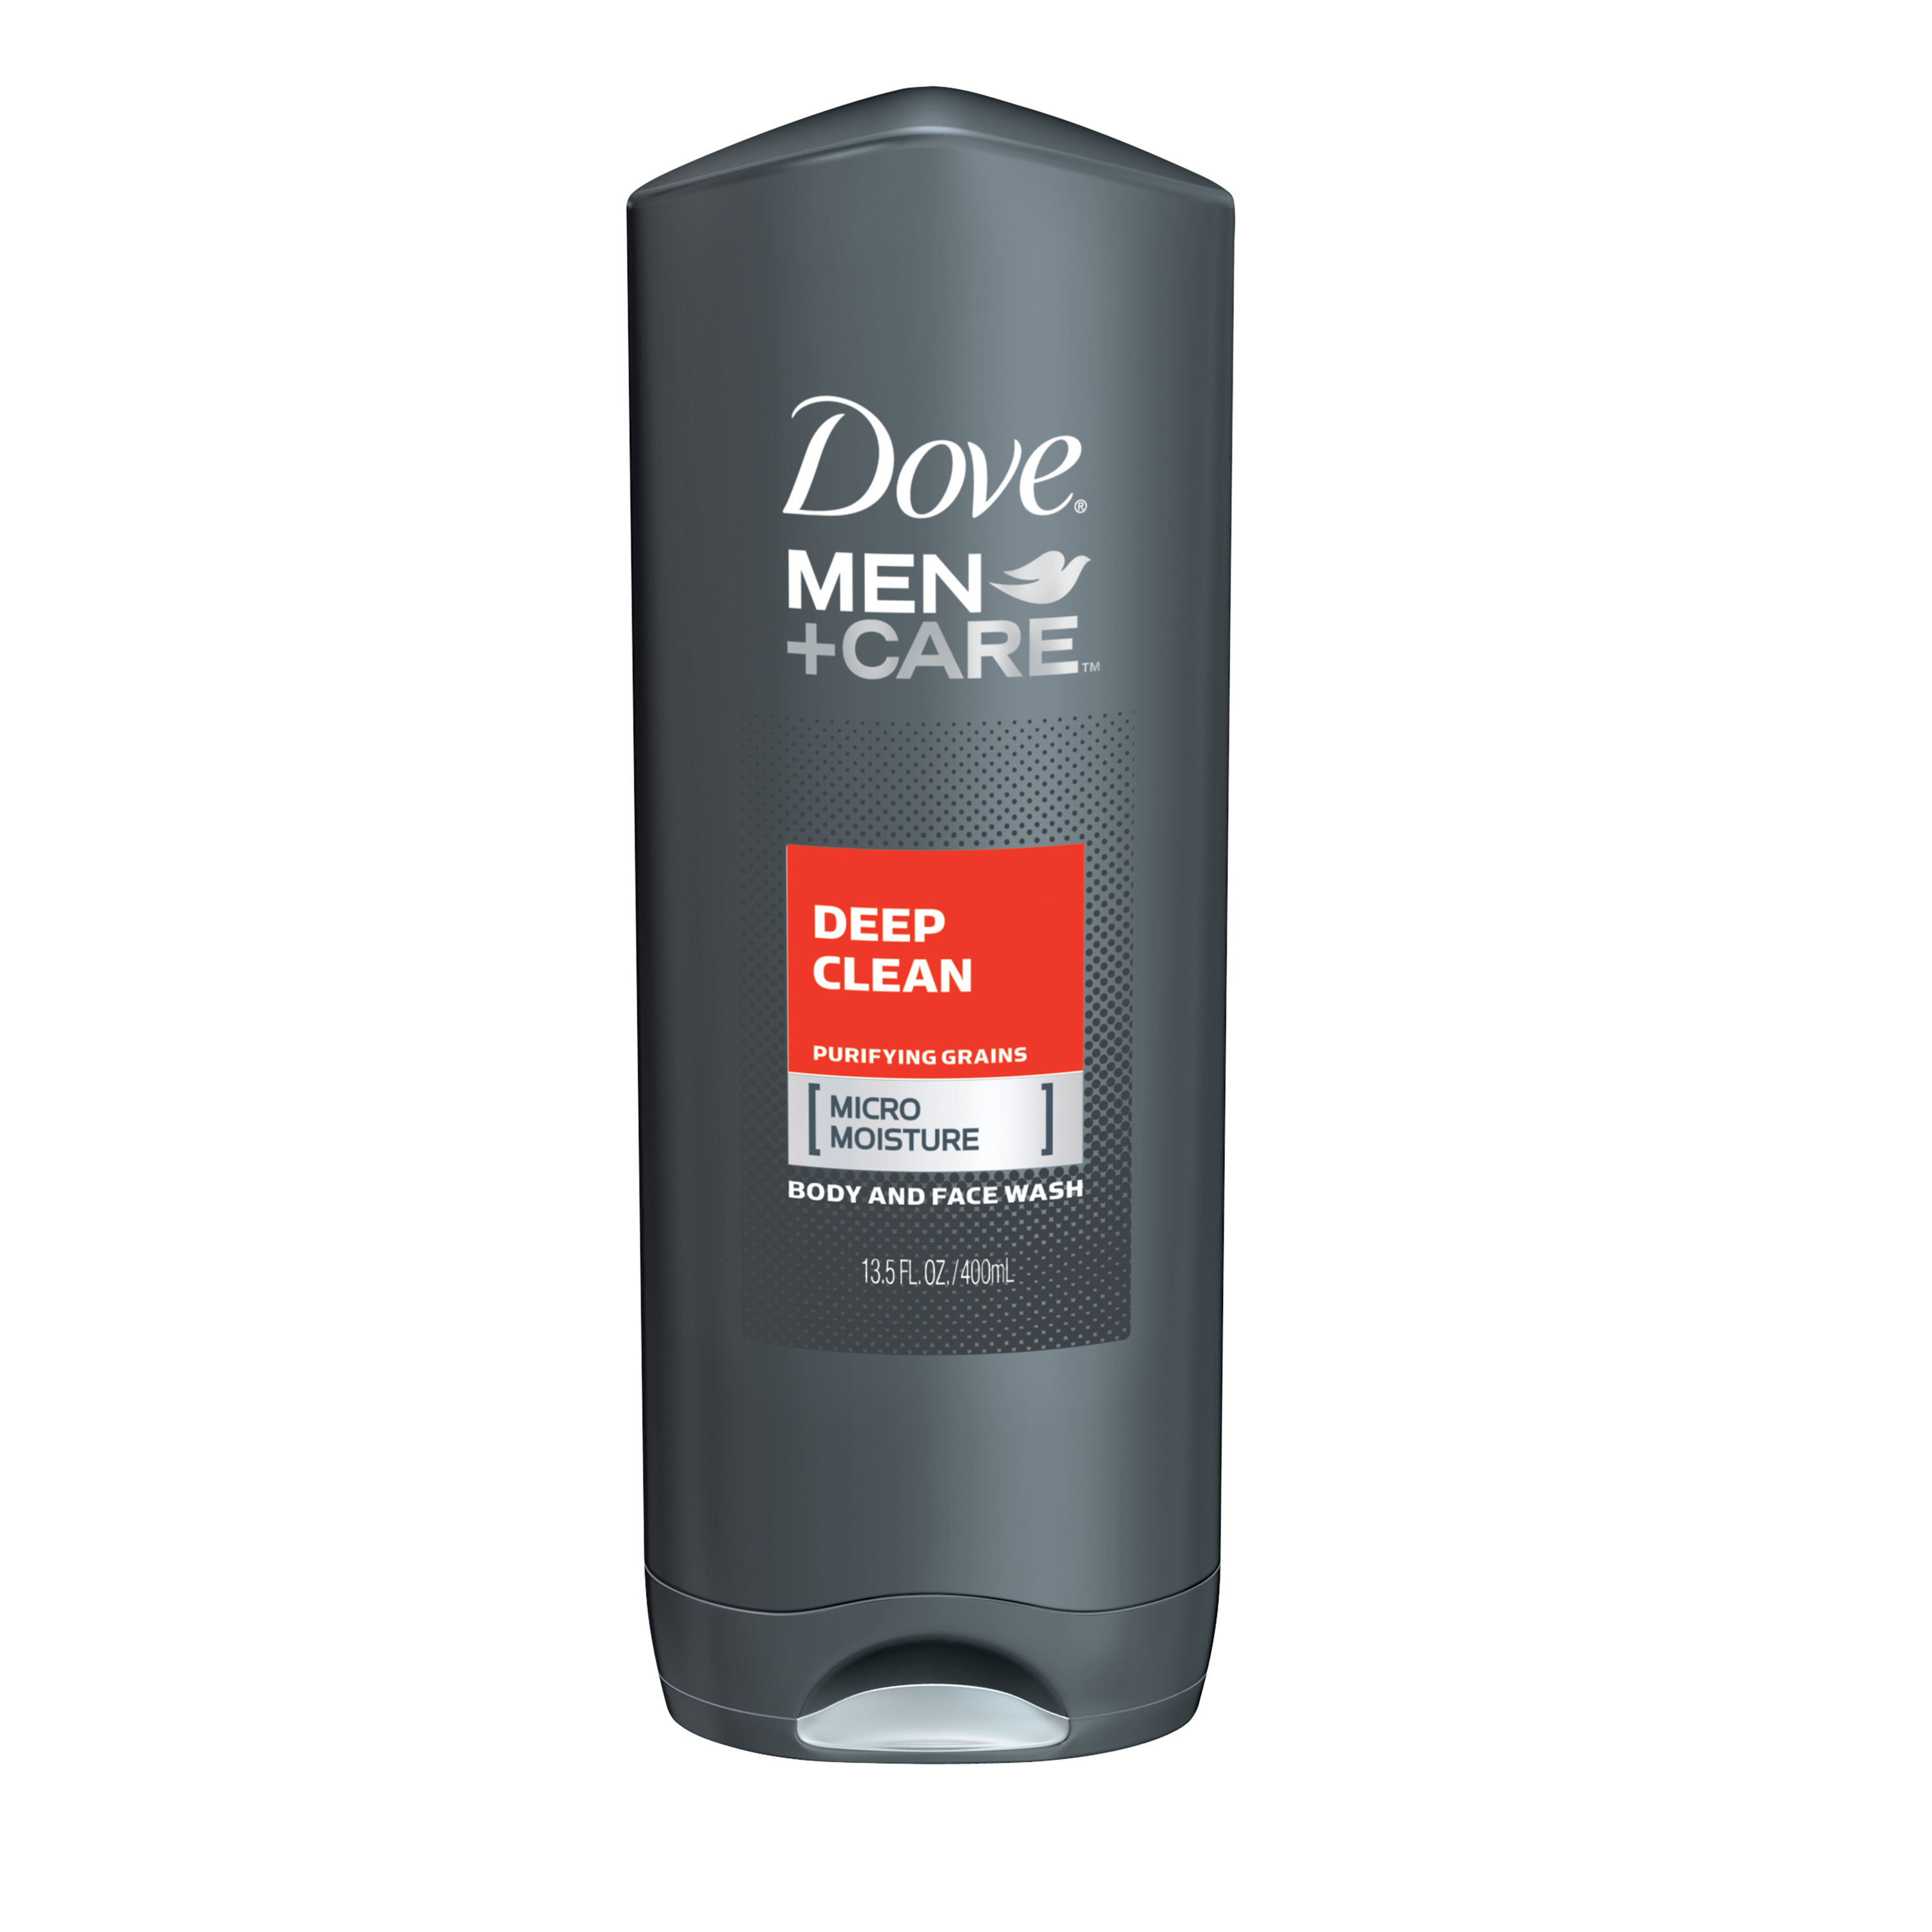 Dove Men+Care Deep Clean Body and Face Wash 13.5 oz